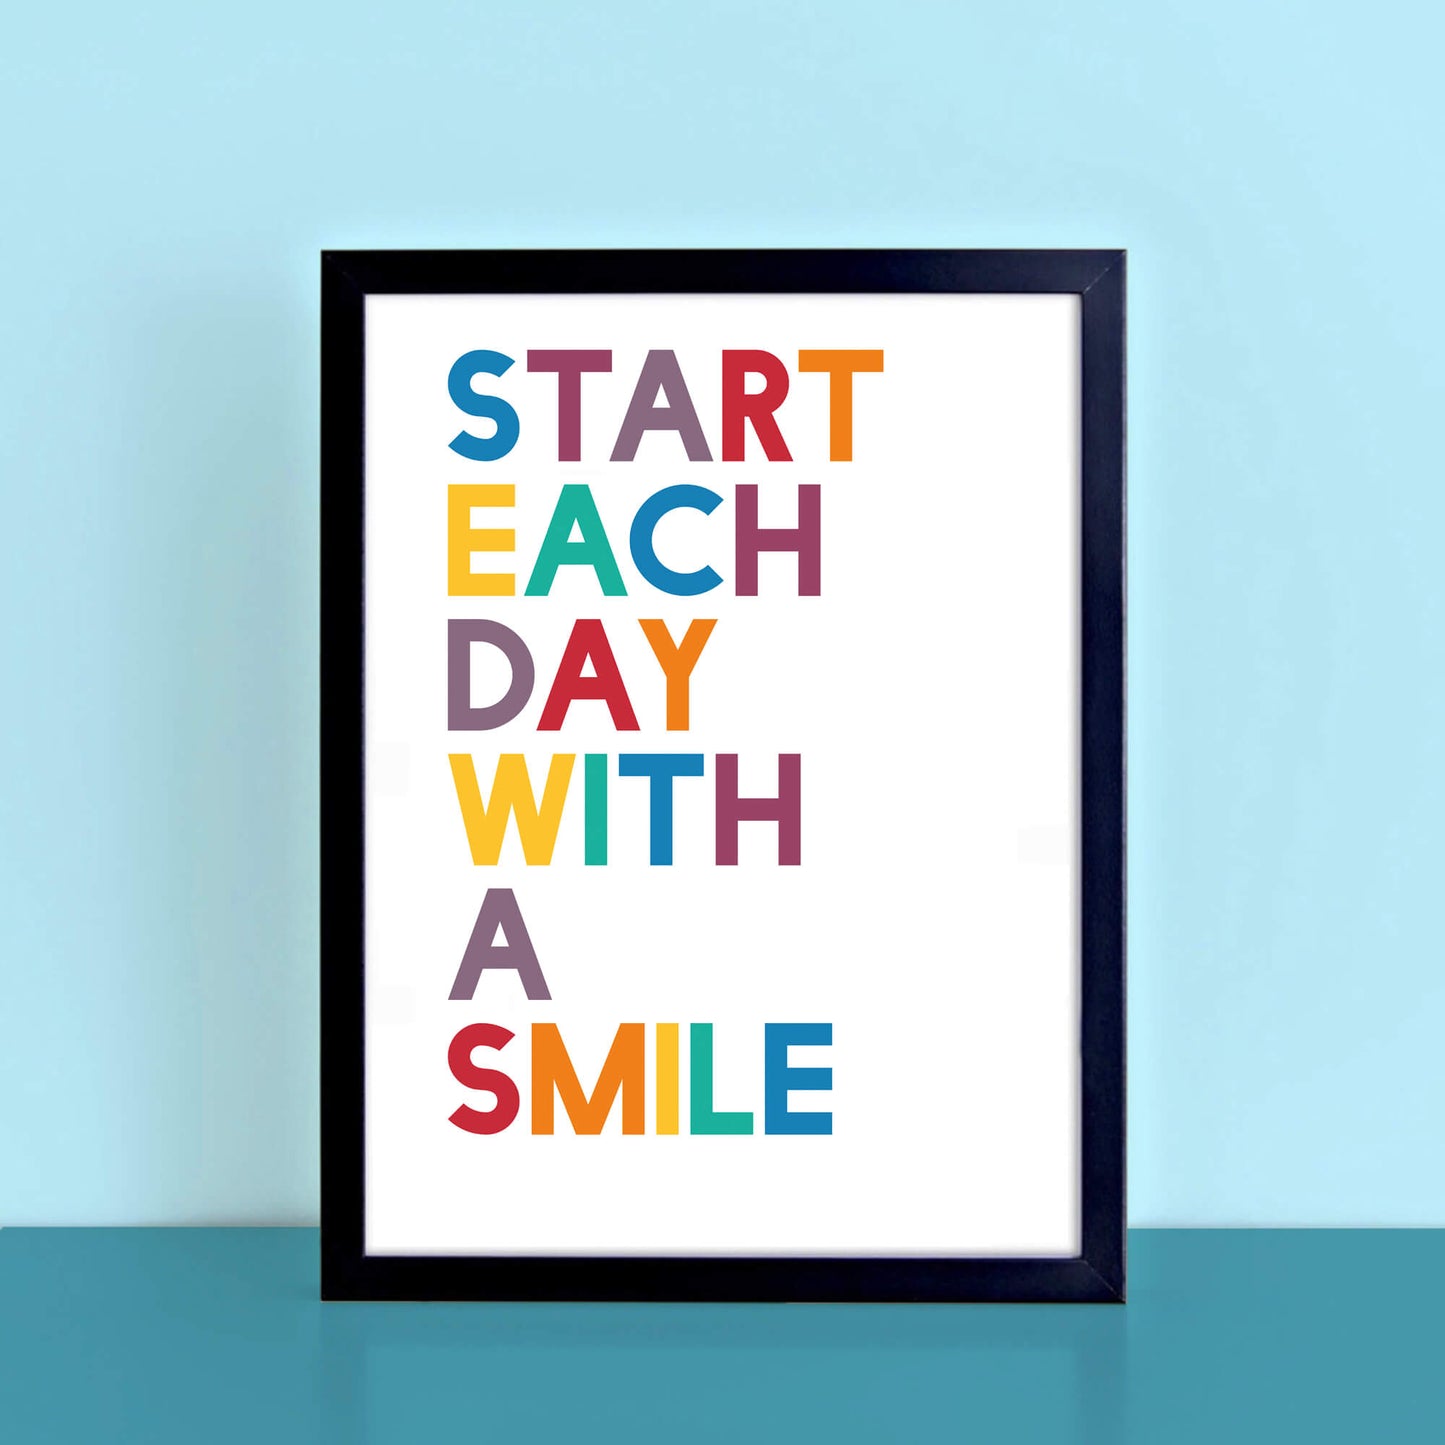 Start Each Day With A Smile Wallprint by SixElevenCreations. Product Code SEP0212